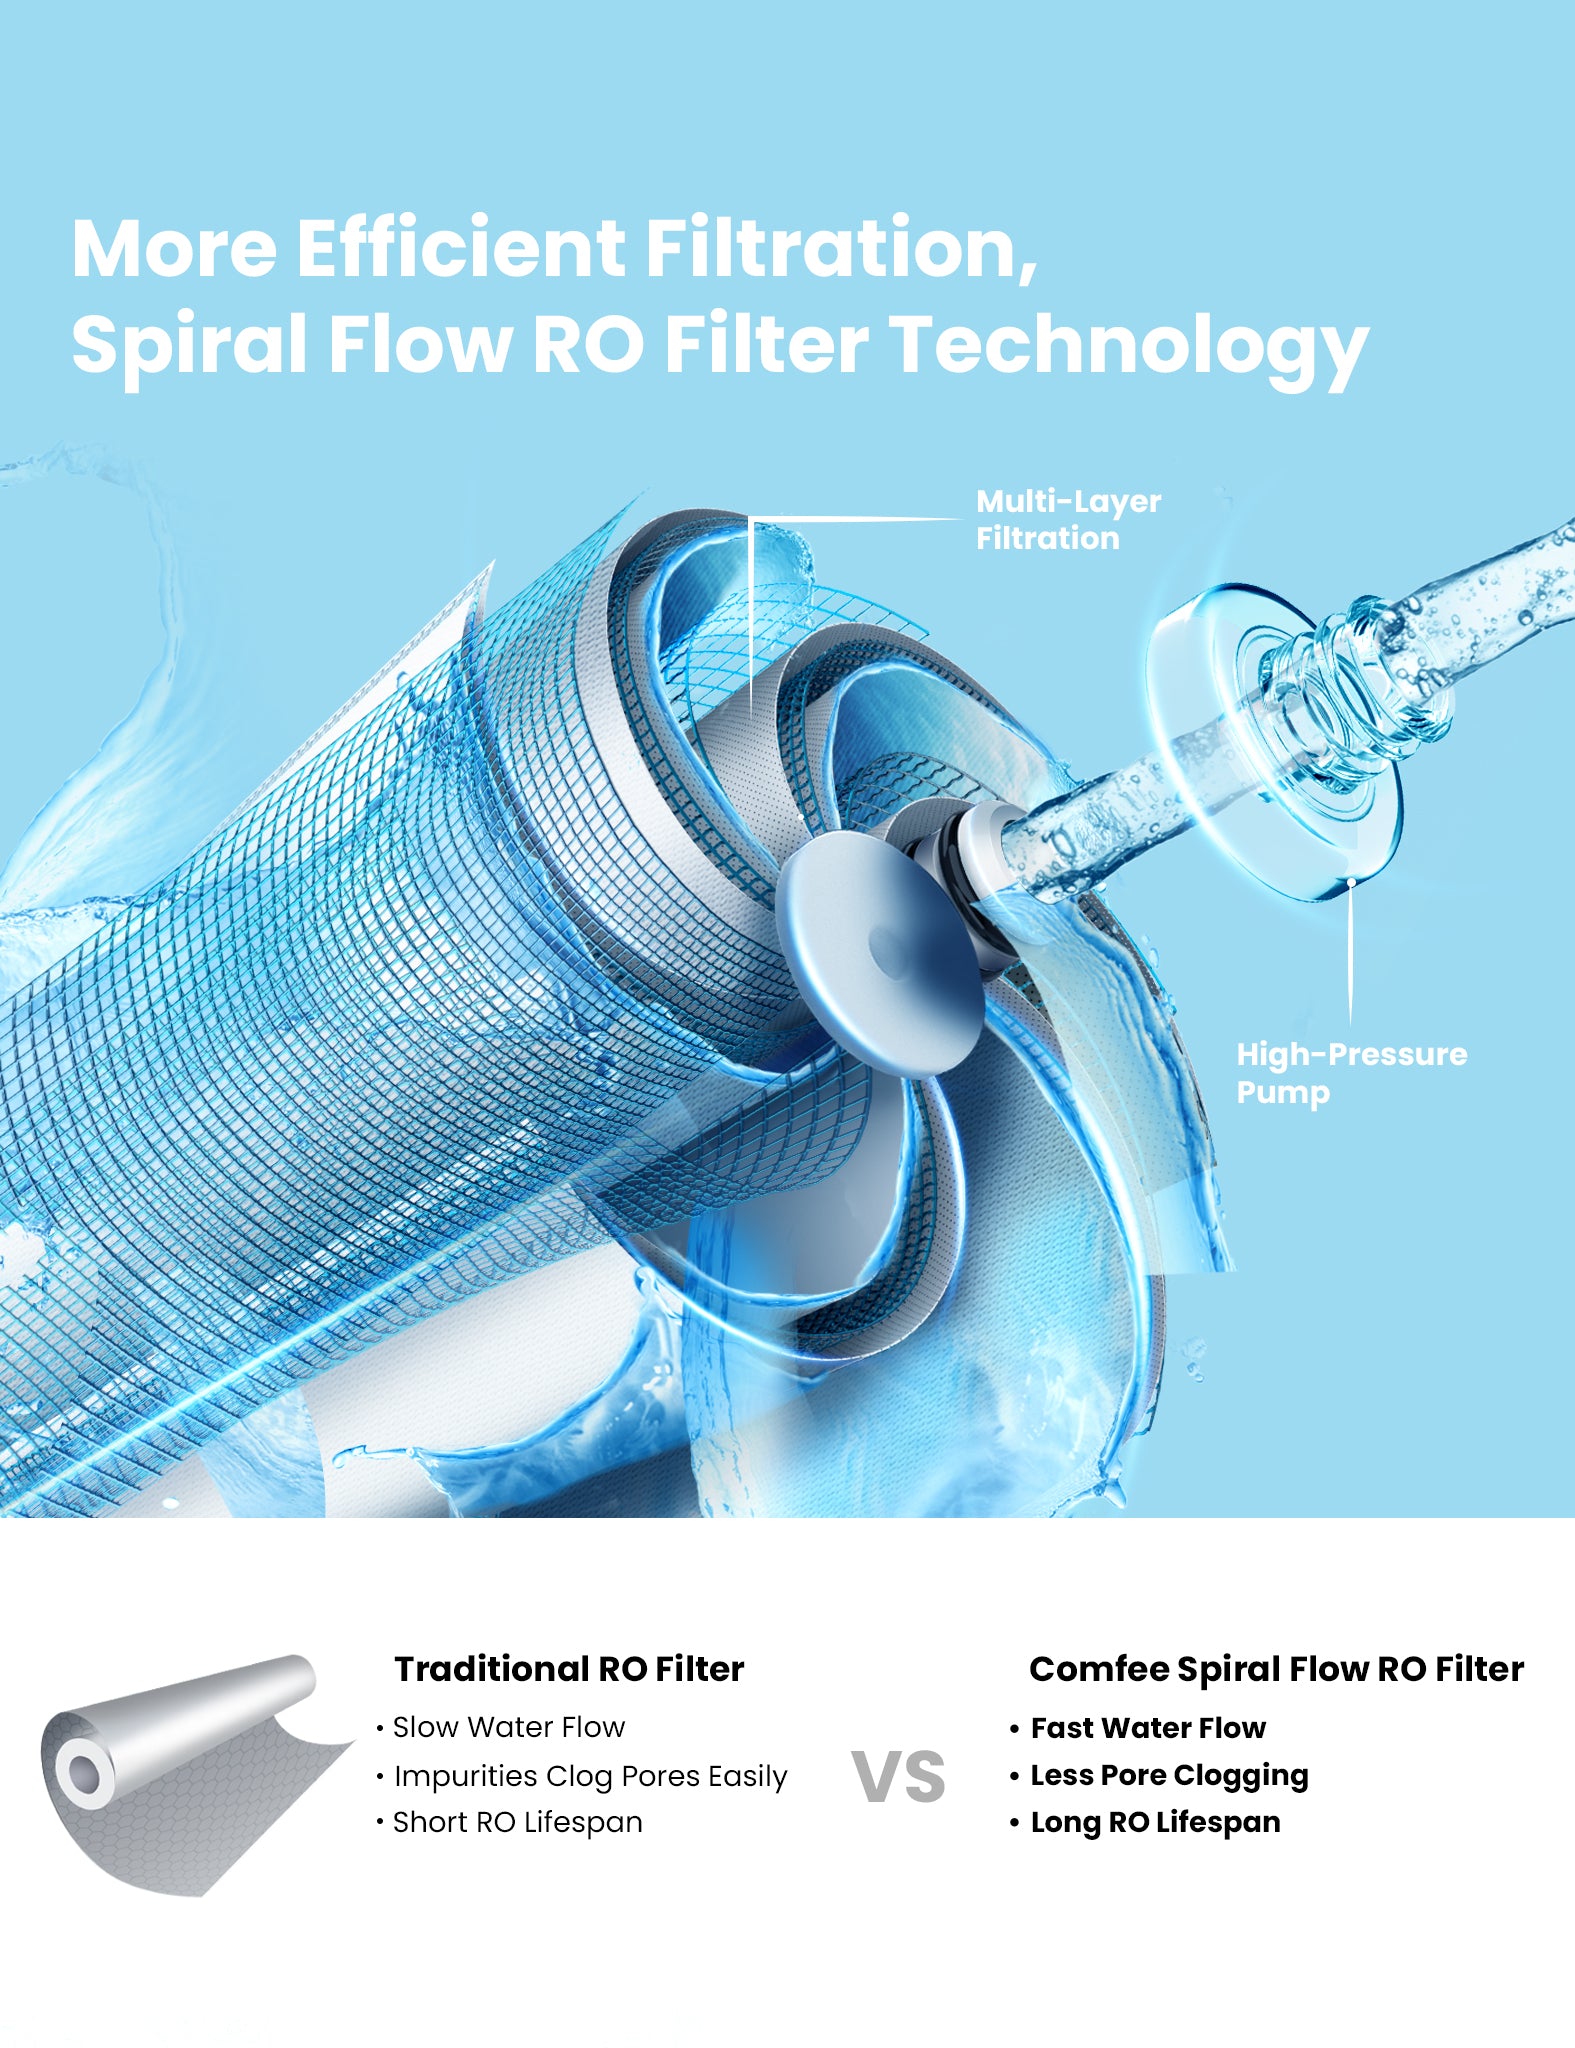 a comparision between comfee spiral flow RO filter and traditional one